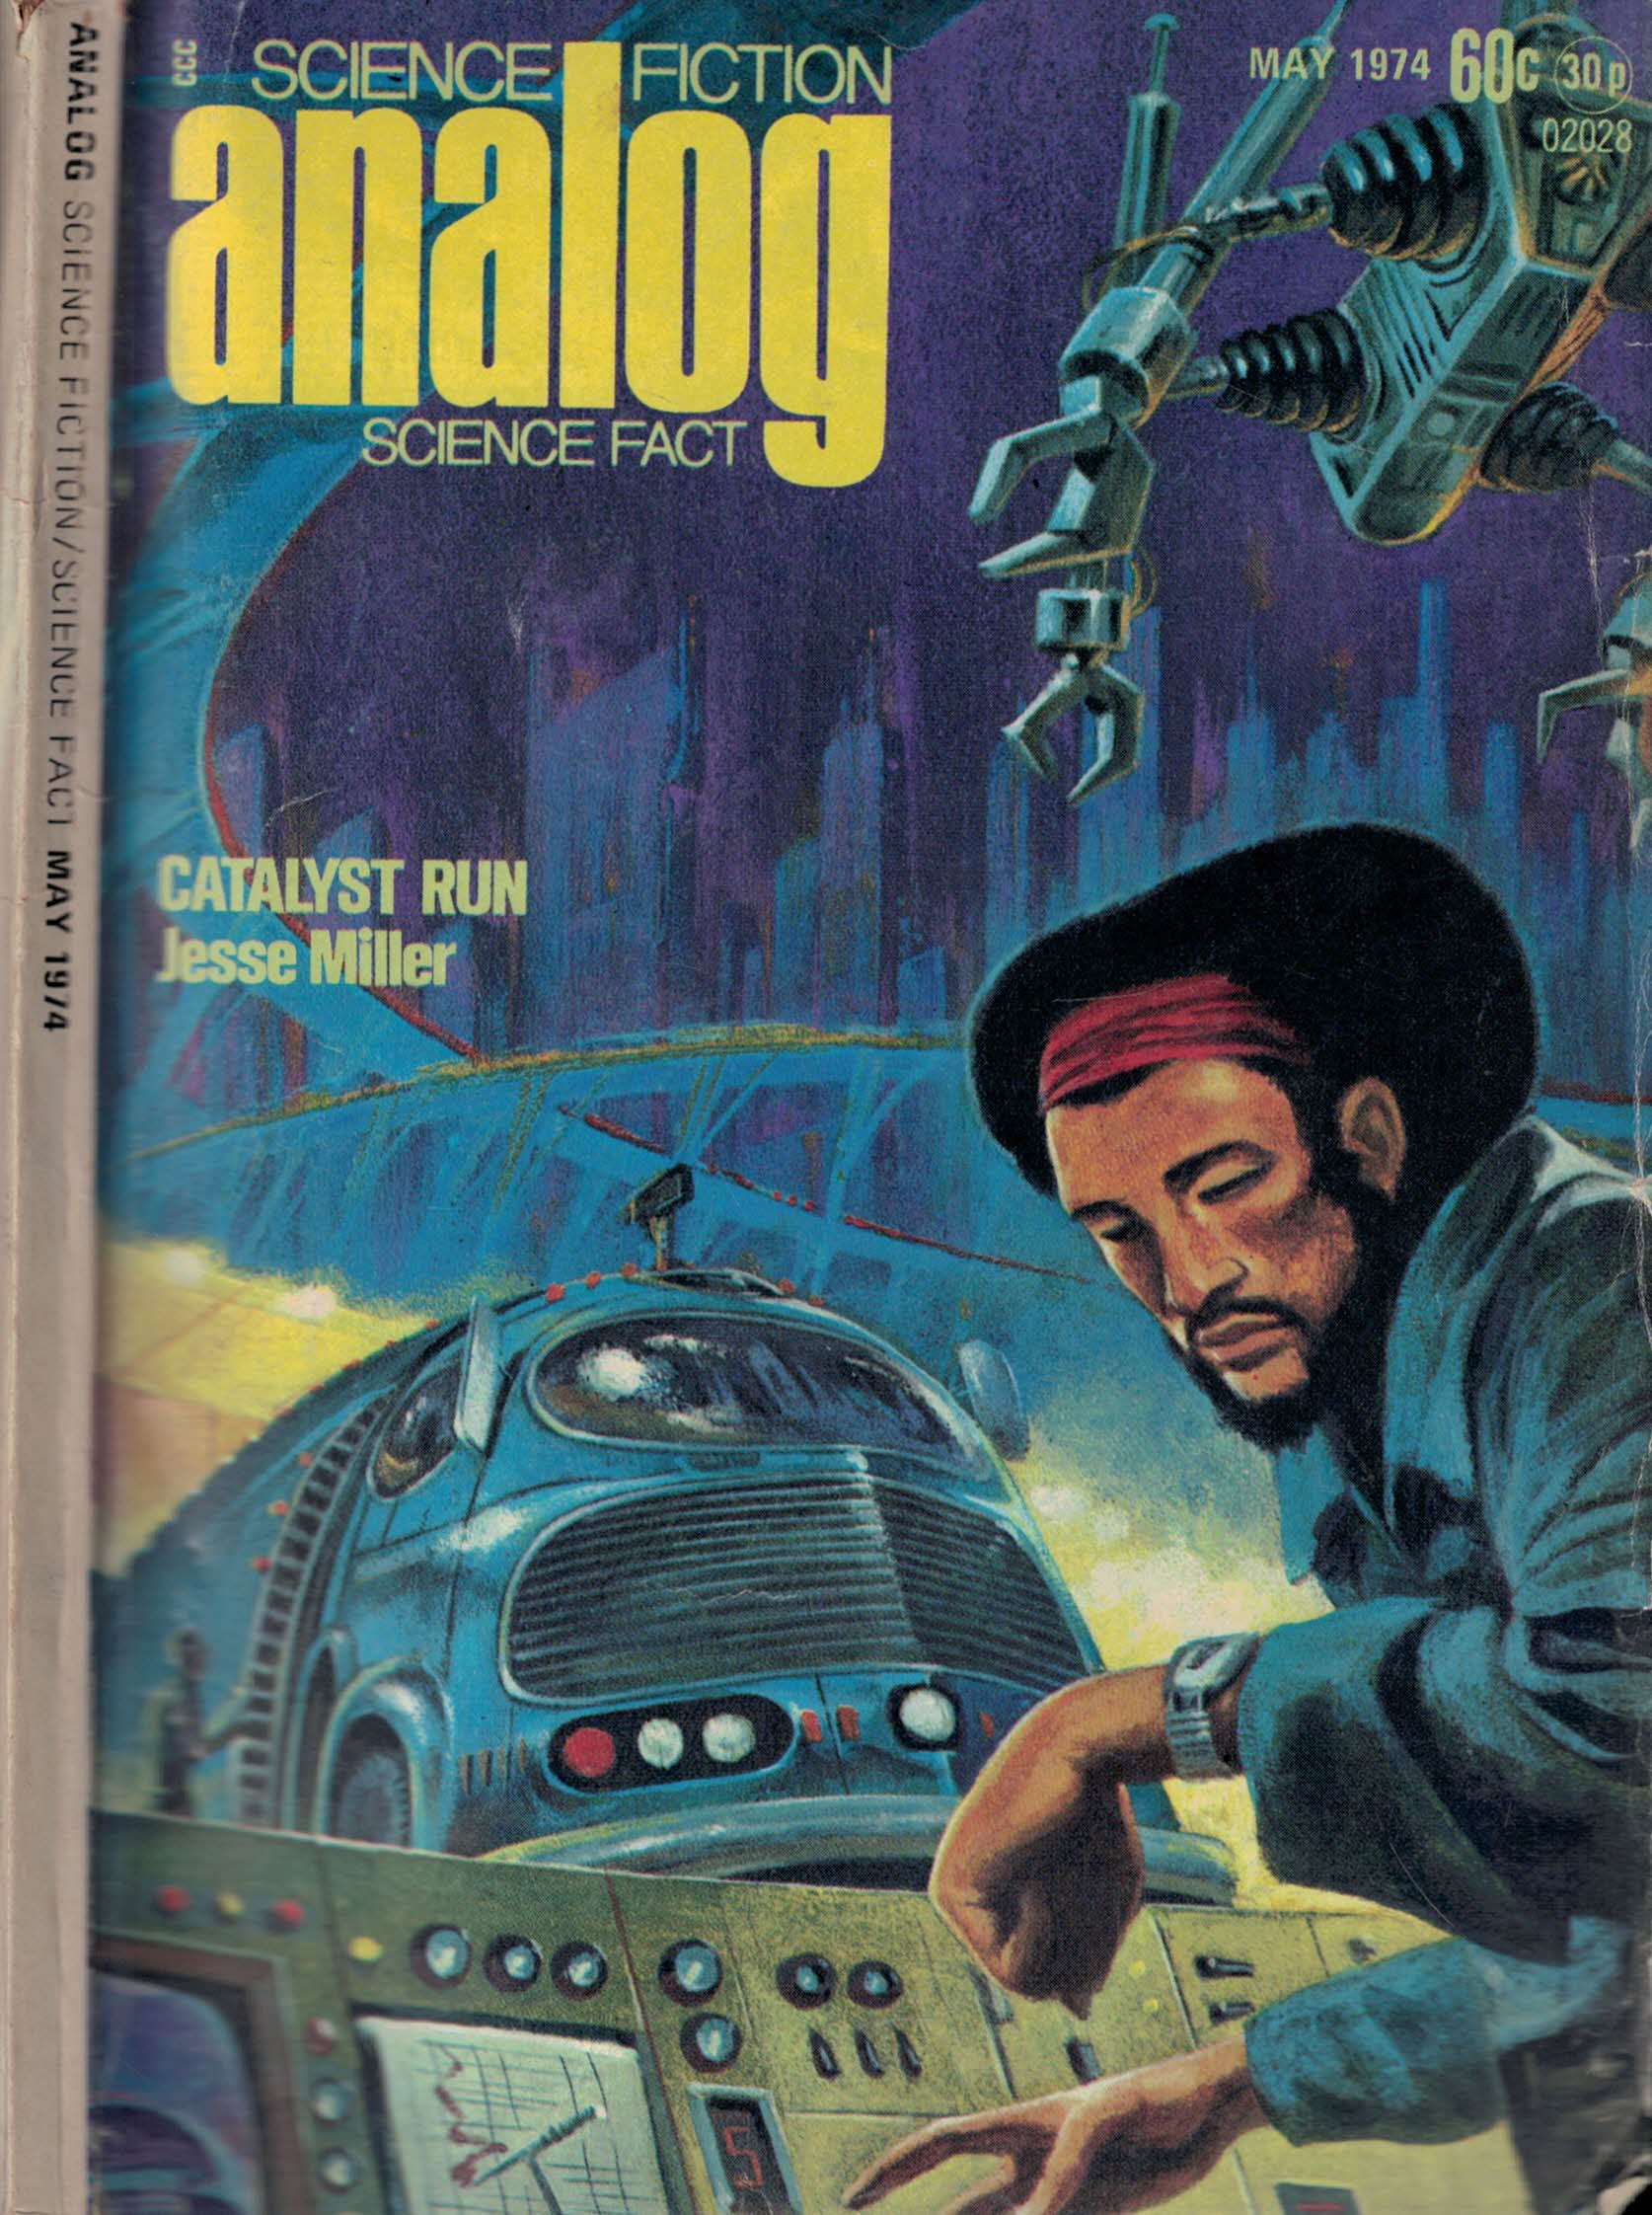 Analog. Science Fiction and Fact. Volume 93, Number 3. May 1974.